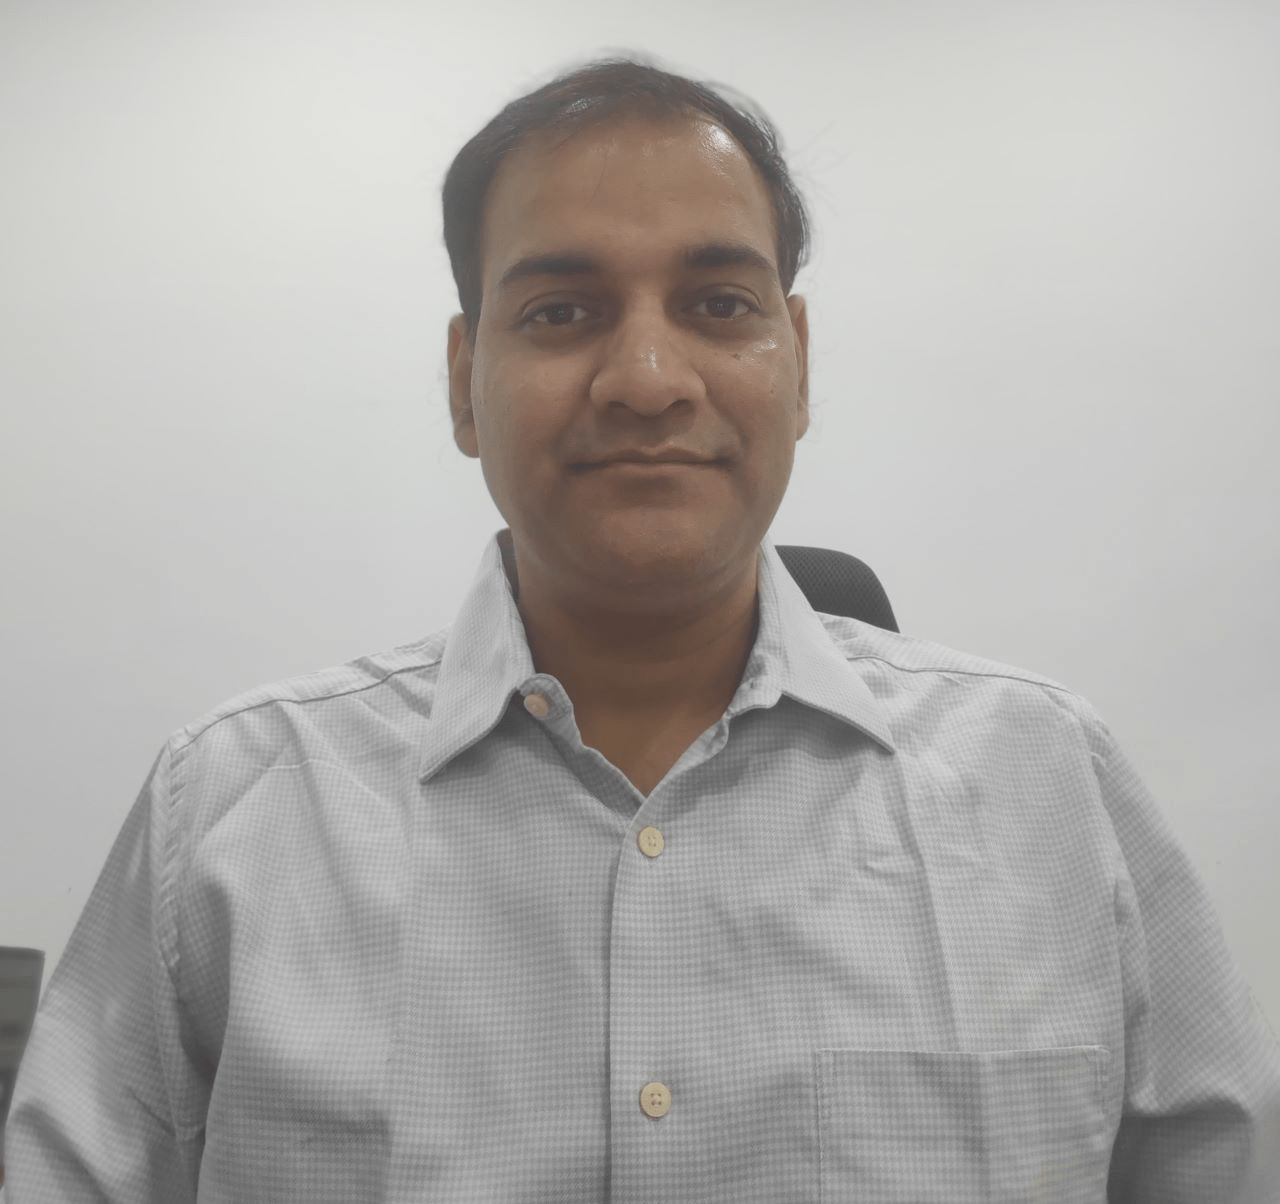 Mr Devesh Dhar Dwivedi has joined CMS IT as Chief Finance Officer effective 3rd February 2023, adding to the strength of senior leadership in the team.